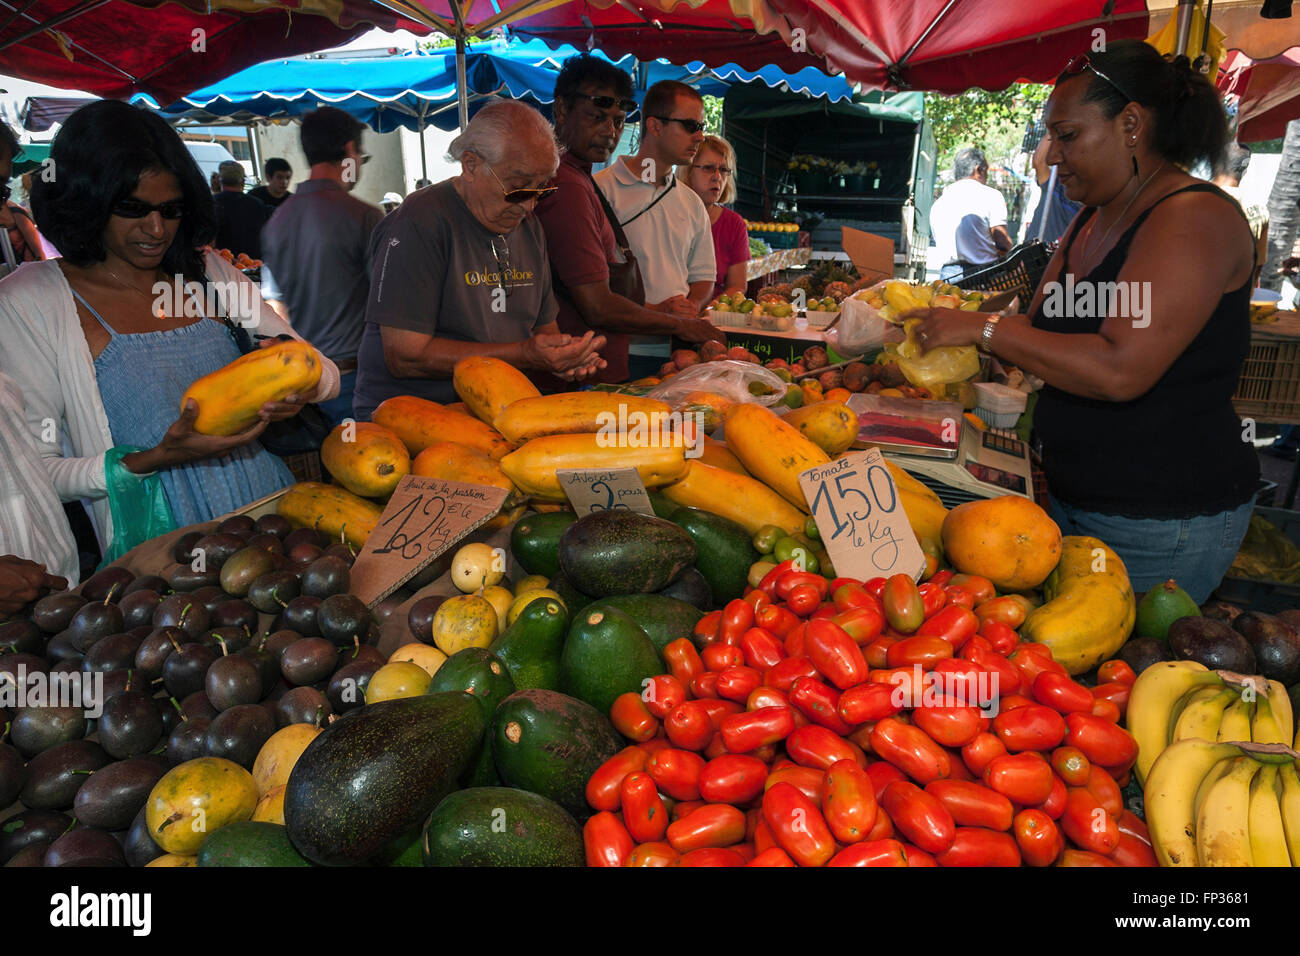 Vegetables and fruit for sale, stall, market, Saint Paul, Reunion Stock Photo